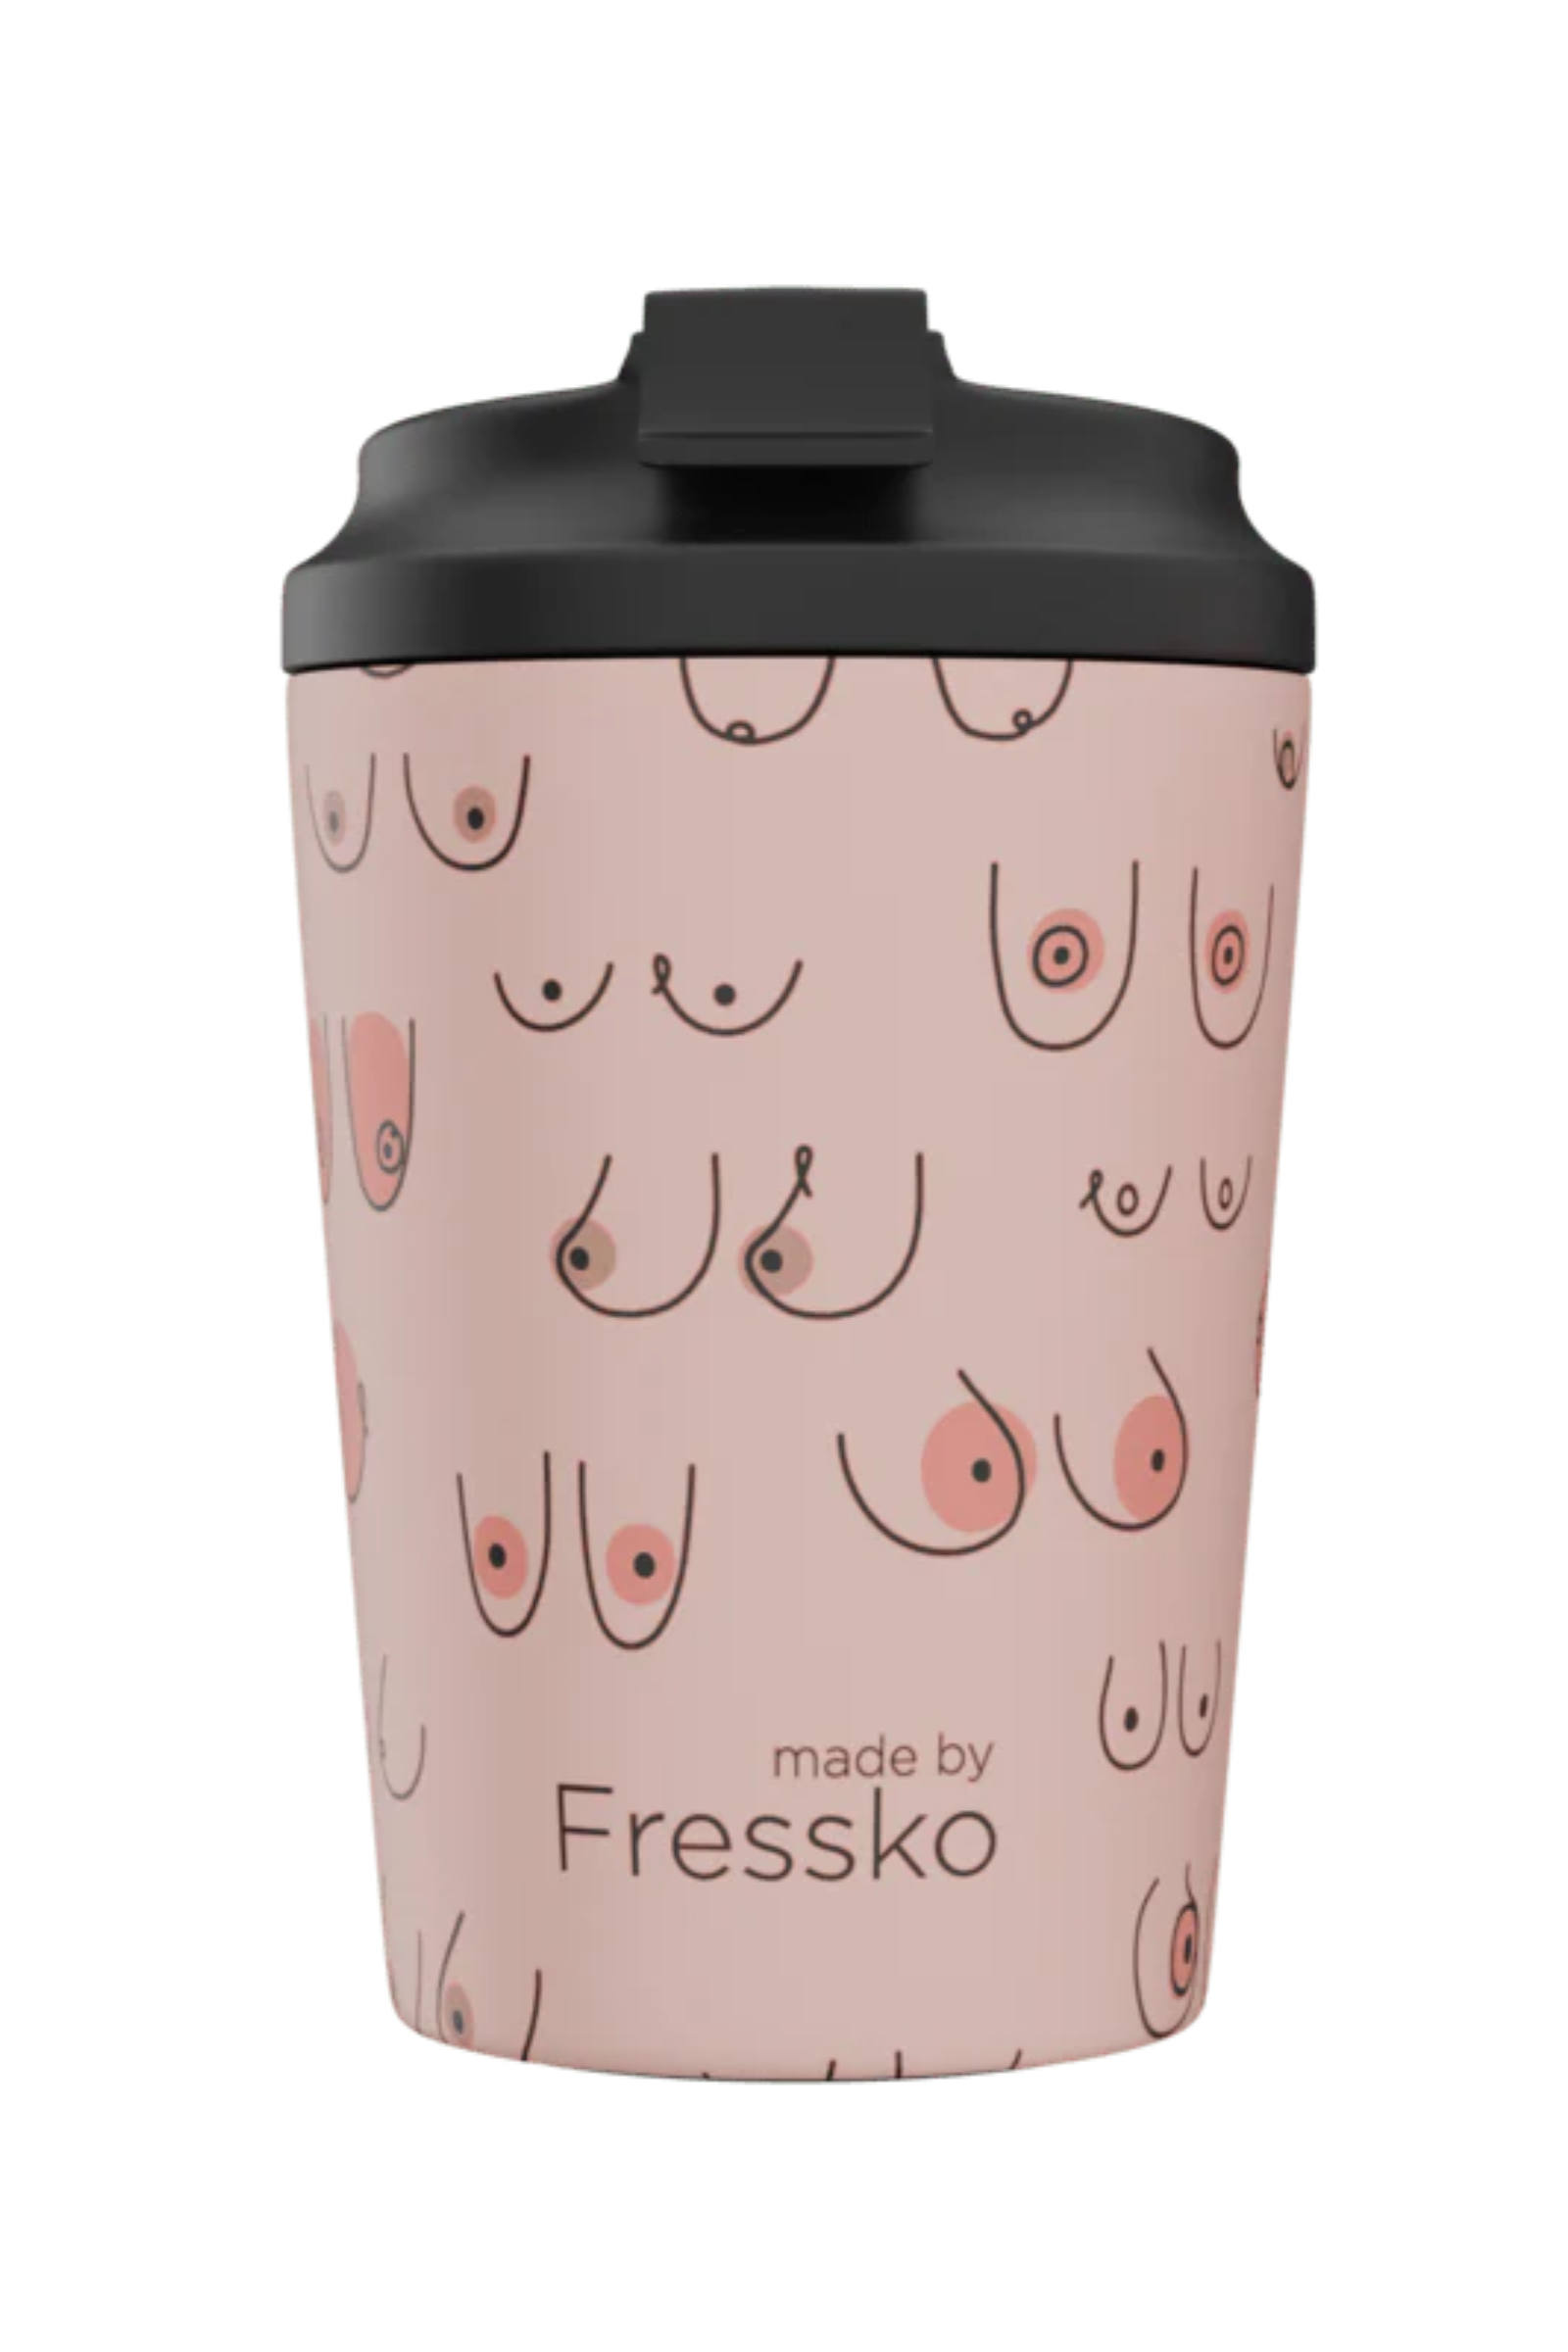 Fressko Reusable Cup Limited Edition Boobie Cup 8oz and 12oz